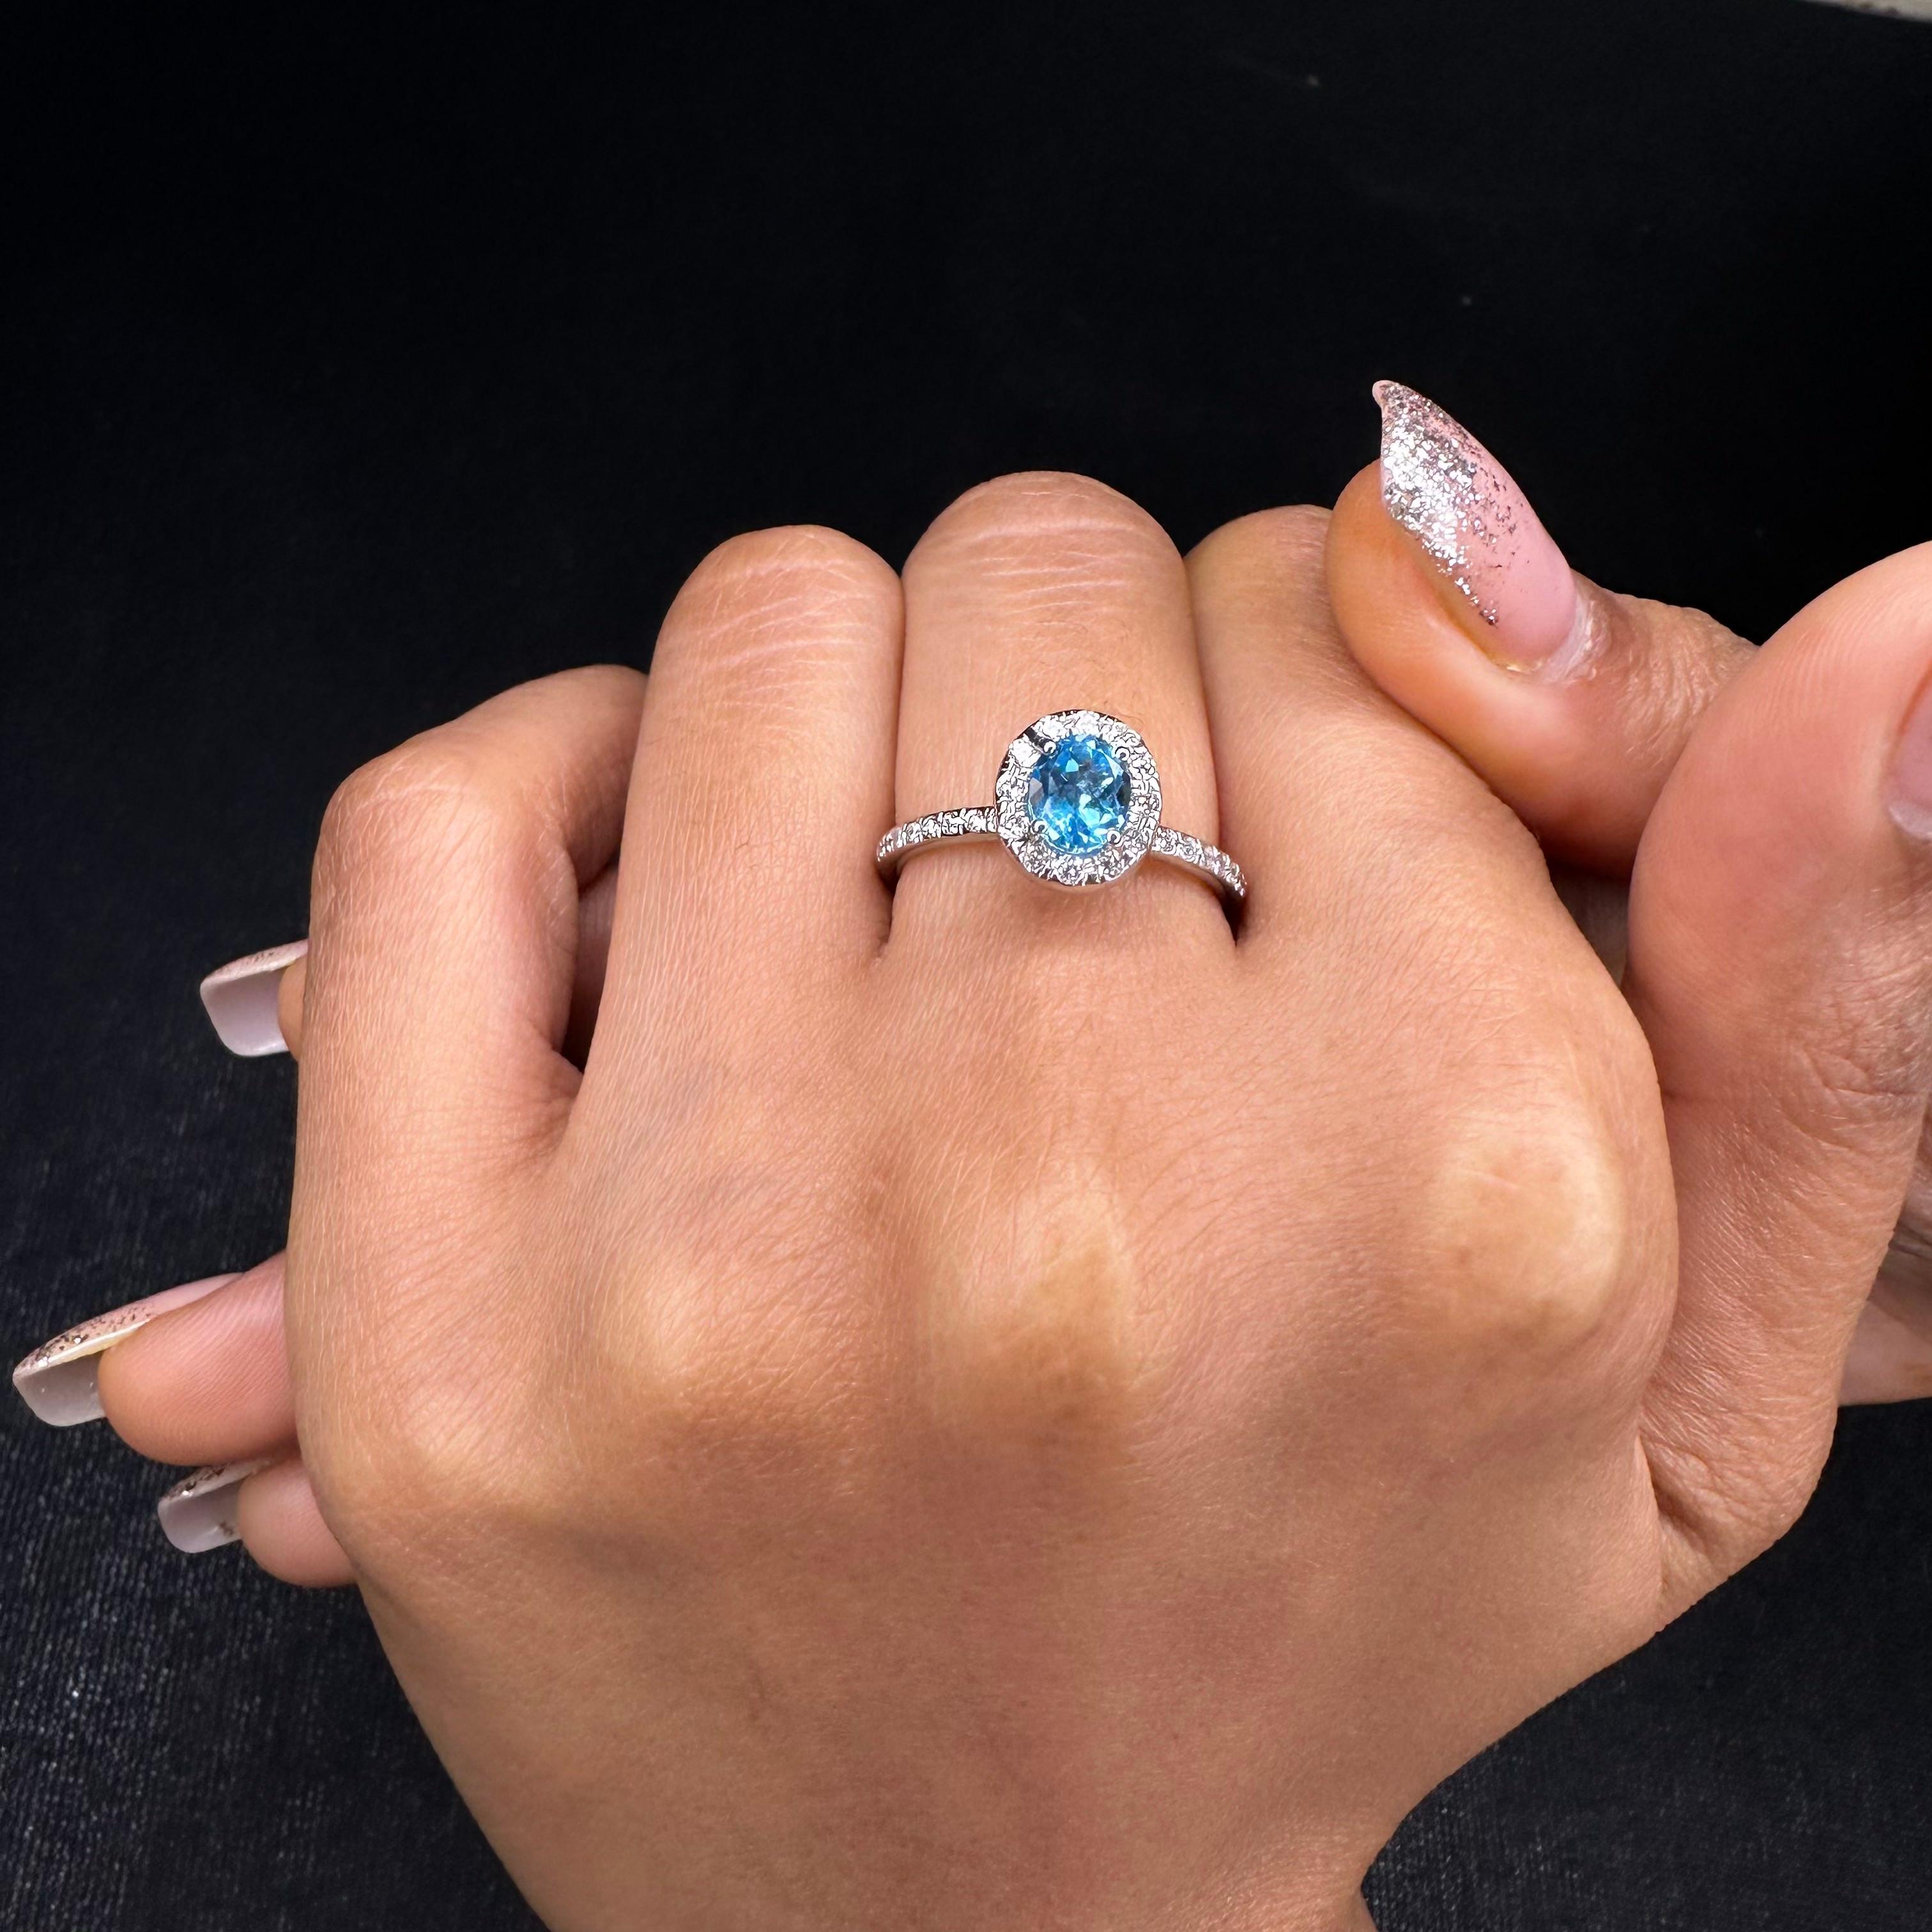 For Sale:  Real 14kt Solid White Gold Halo Diamond And Oval Cut Blue Topaz Ring For Her 3